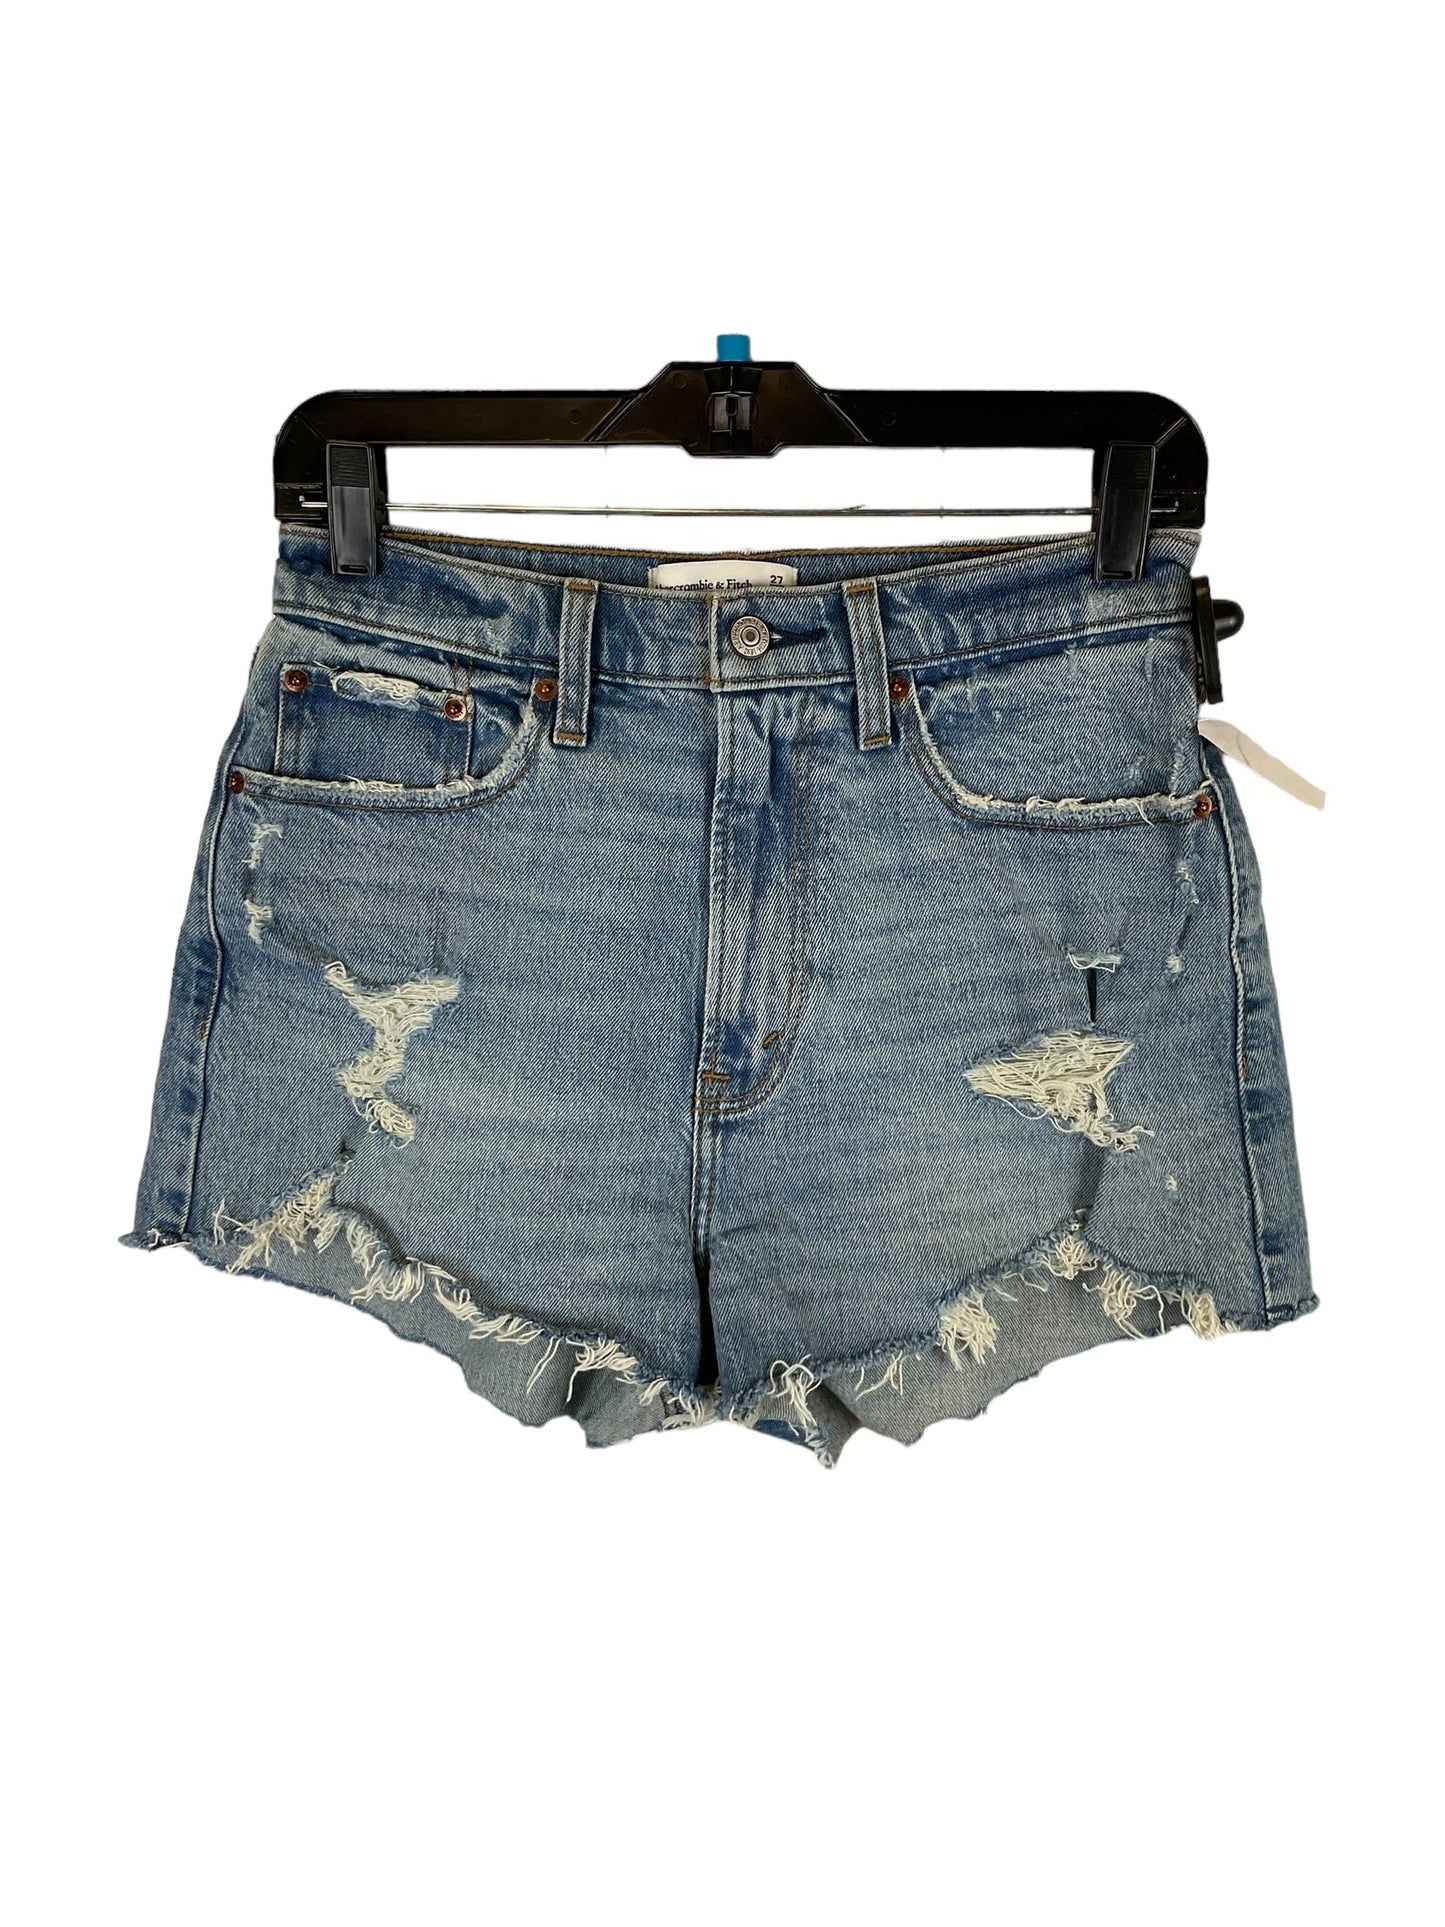 Blue Denim Shorts Abercrombie And Fitch, Size 4